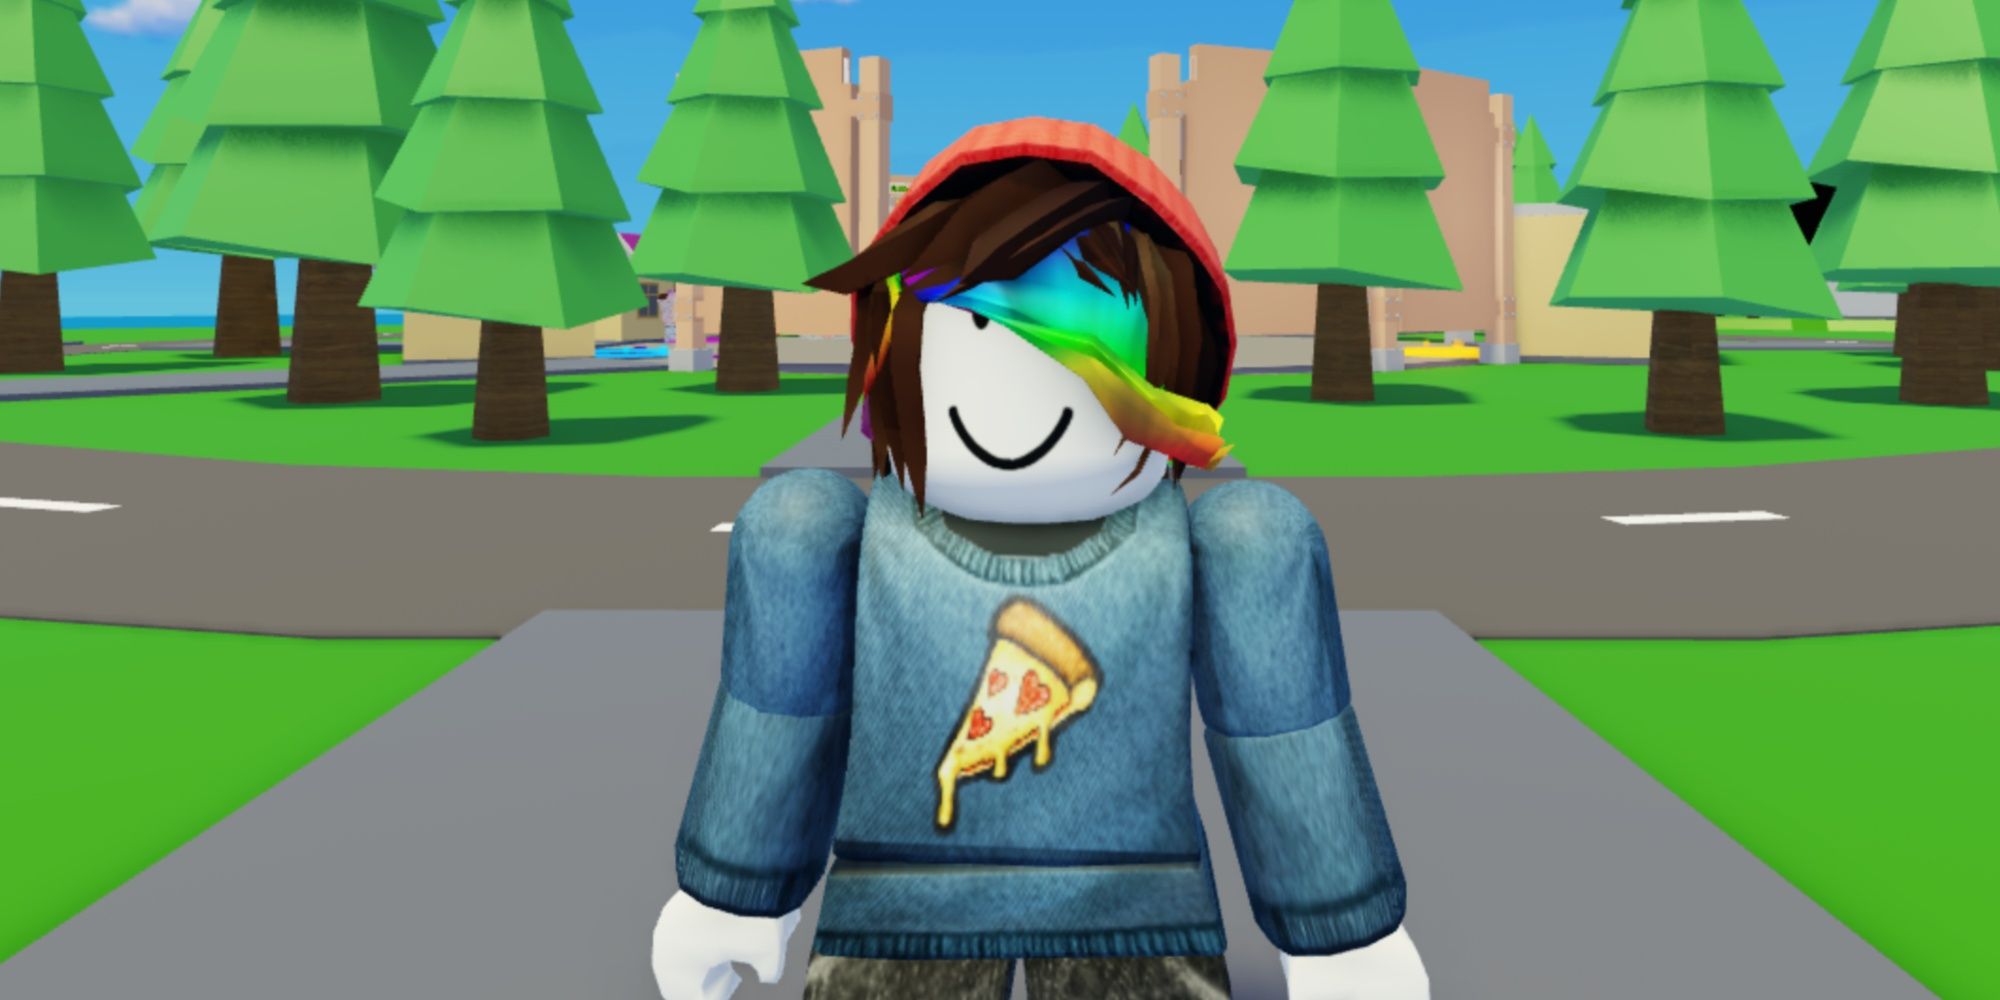 Our character in the Roblox - Billionaire Simulator 2 lobby